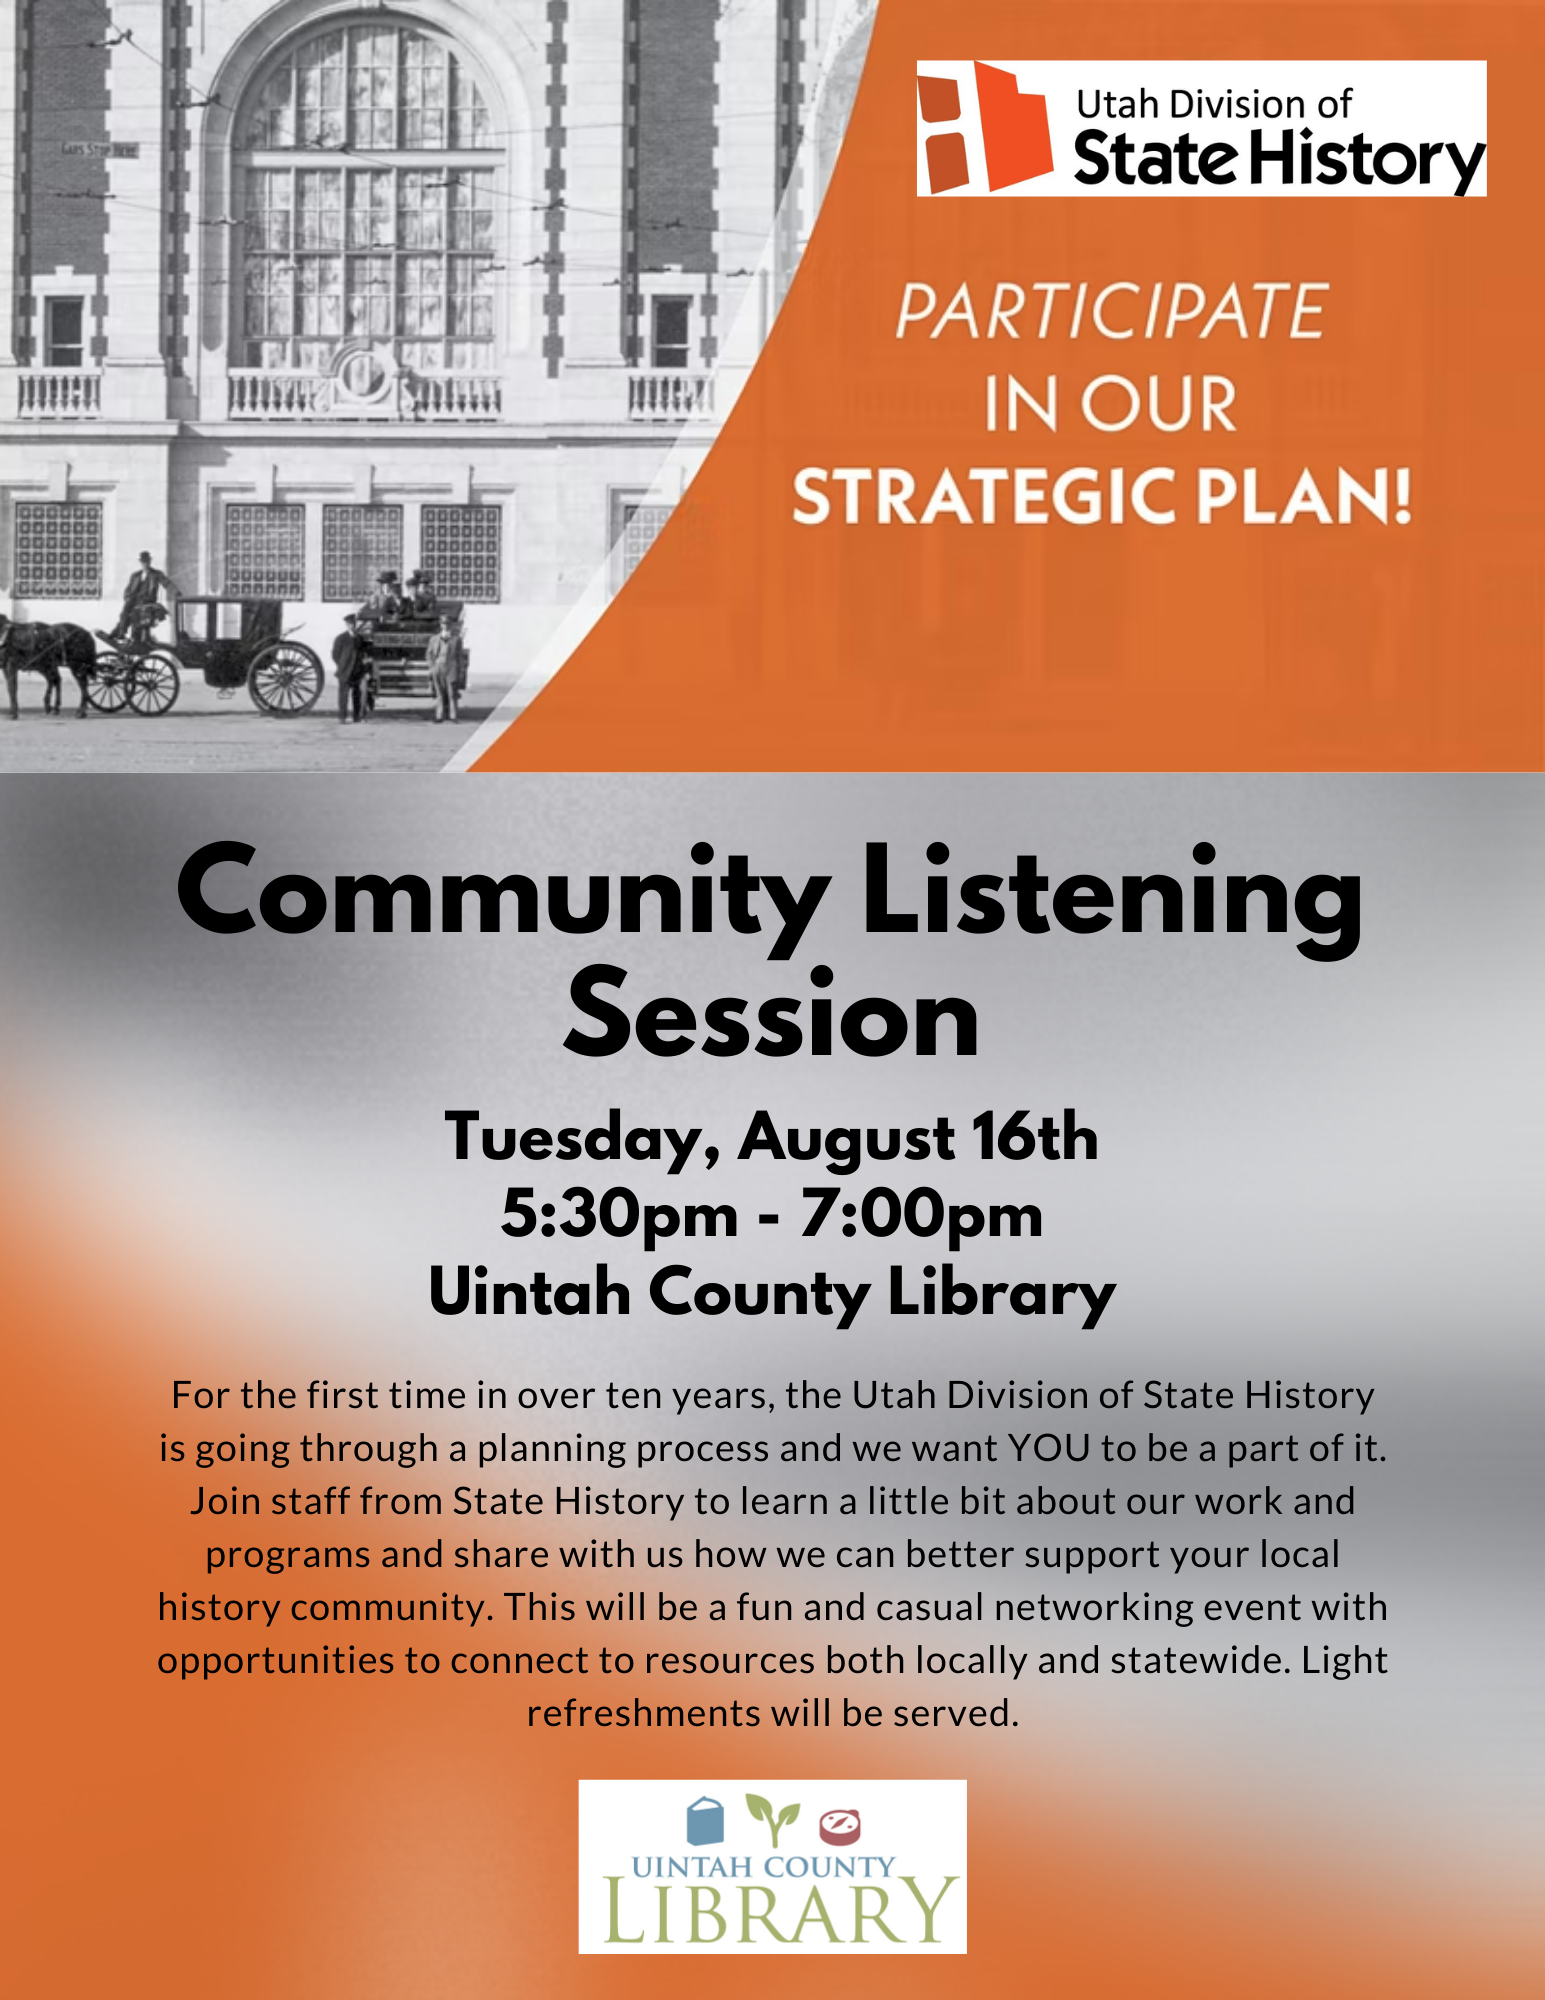 Logo: Utah Division of State History | Text: Participate in our Strategic Plan! | Community Listening Session | Tuesday, August 16th 5:30pm - 7:00pm Uintah County Library | For the first time in over ten years, the Utah Division of State History is going through a planning process and we want YOU to be a part of it. Join staff from State History to learn a little bit about our work and programs and share with us how we can better support your local history community. This will be a fun and casual netwo..."